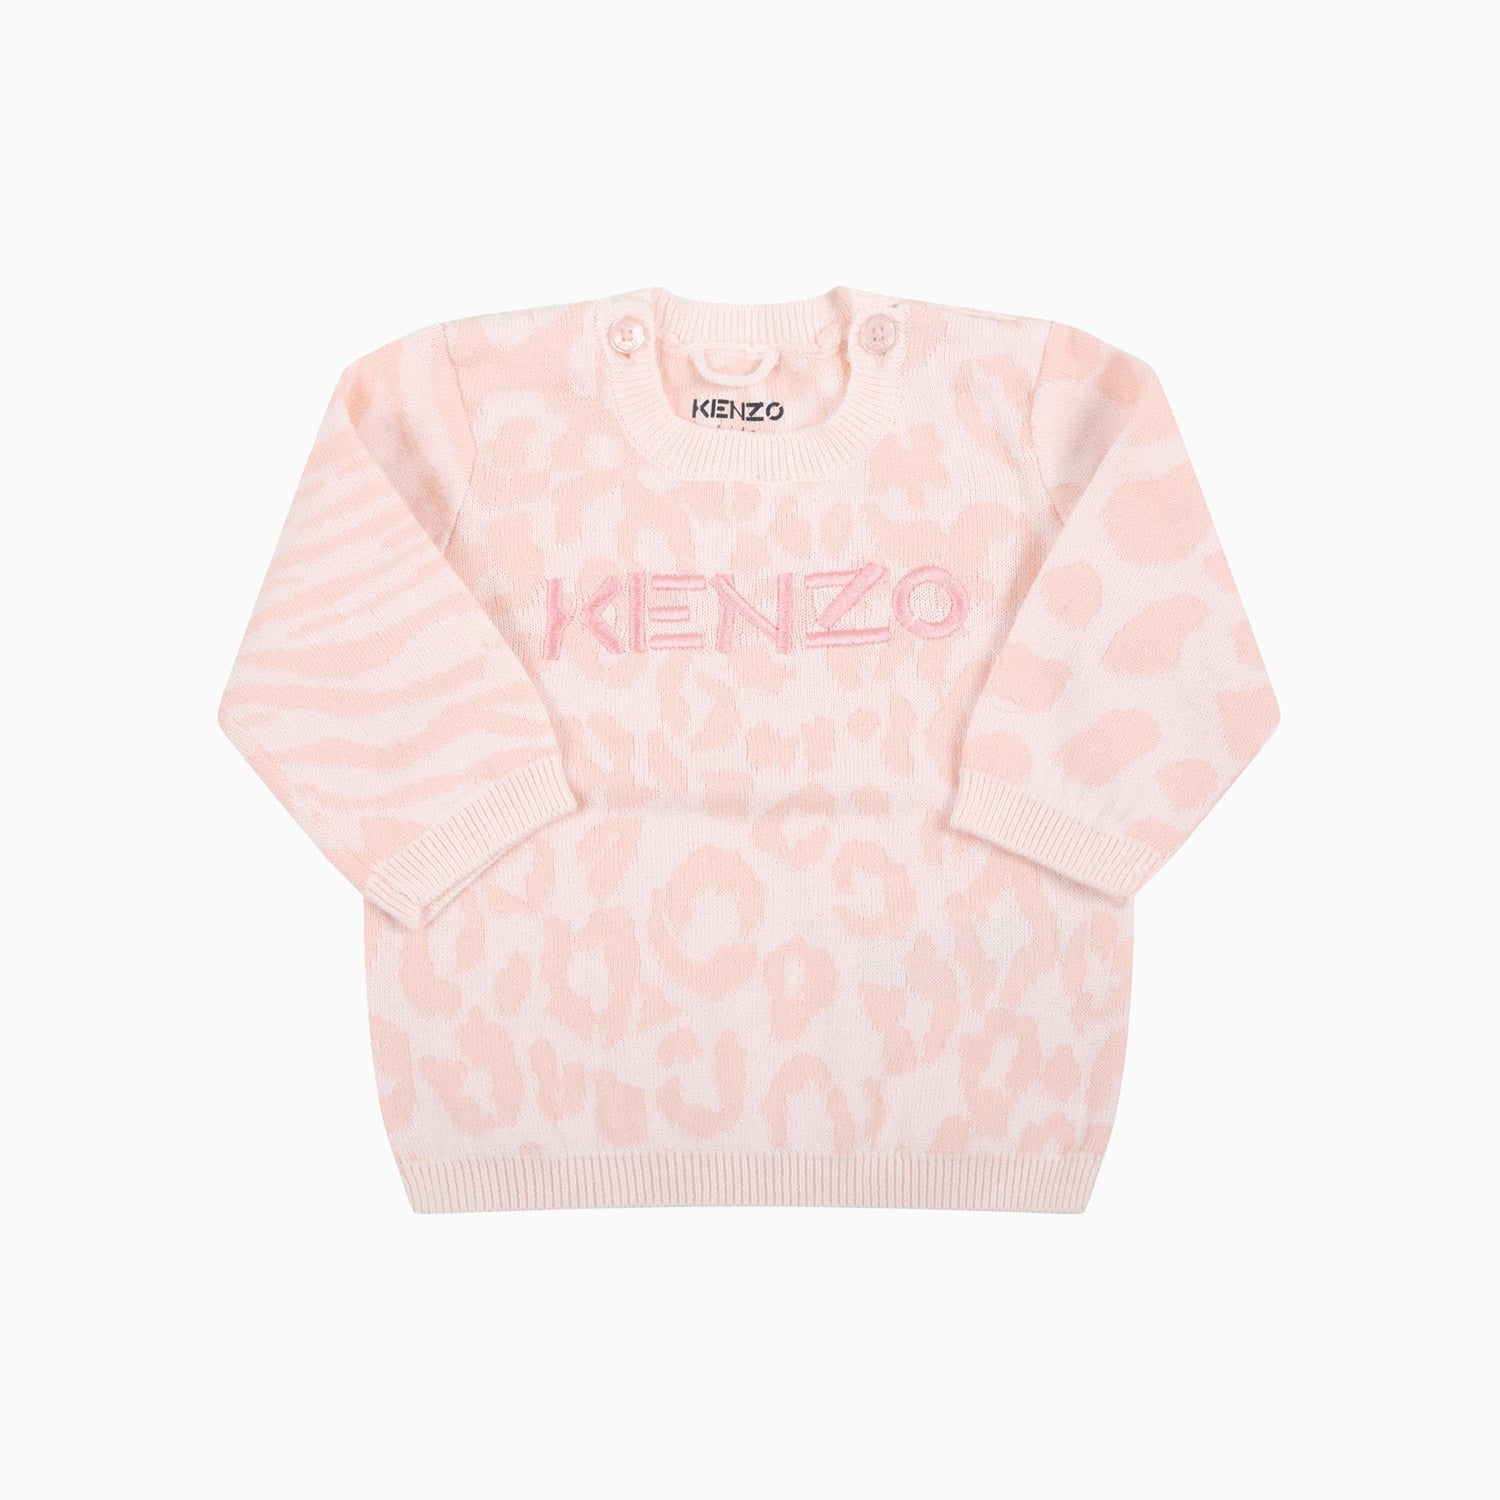 Kenzo Kid's Animal Print Outfit - Color: Pale Pink - Kids Premium Clothing -